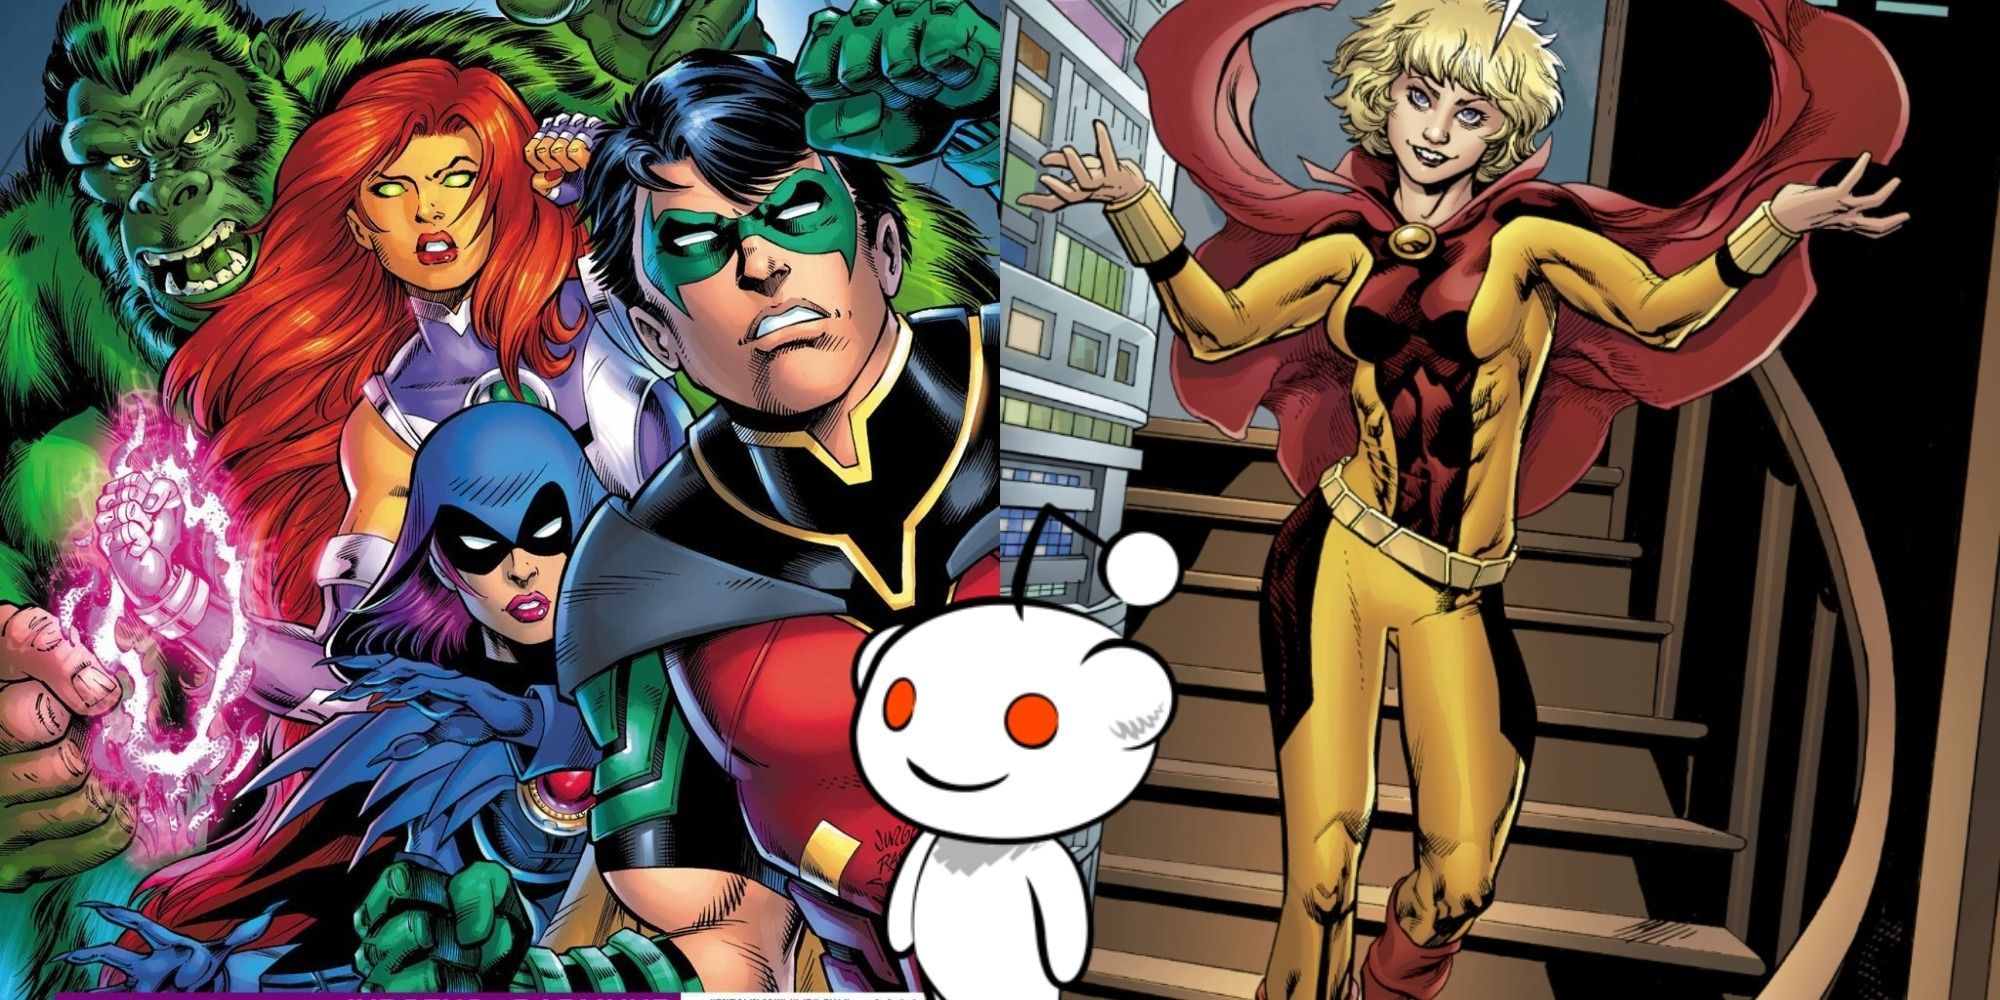 Split image showing the Teen Titans and Terra, and Snoo from Reddit.